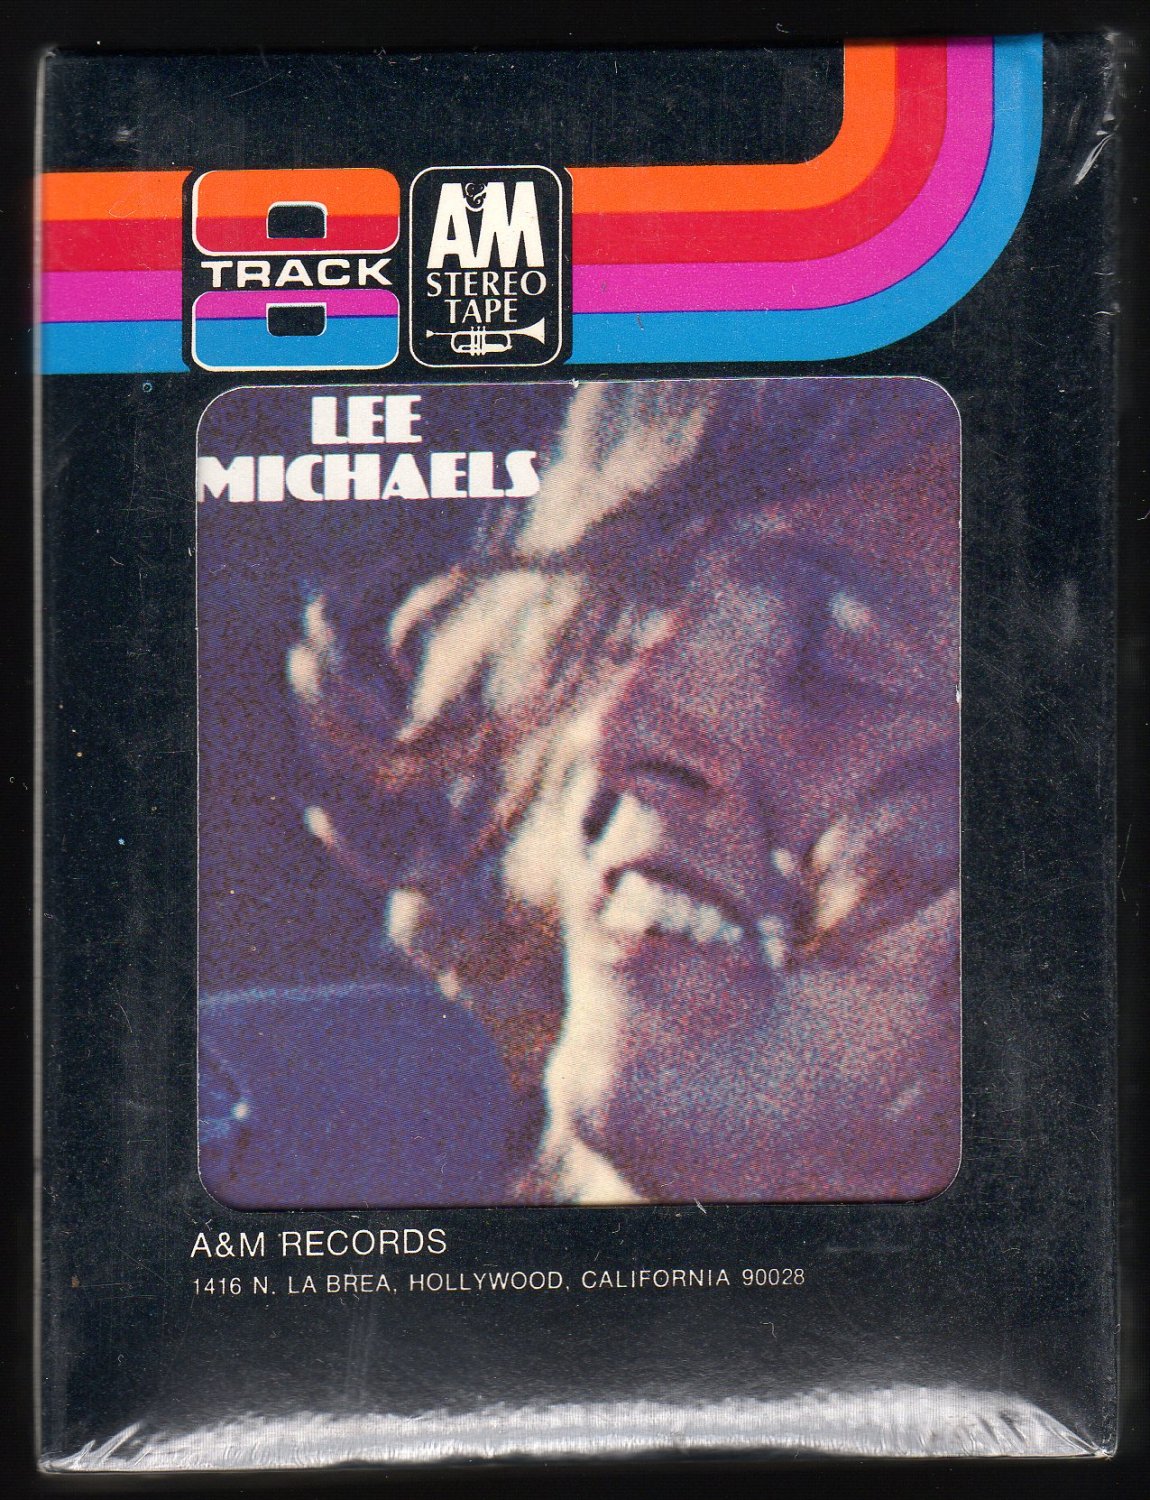 Lee Michaels - Lee Michaels 1969 A&M Sealed A20 8-TRACK TAPE